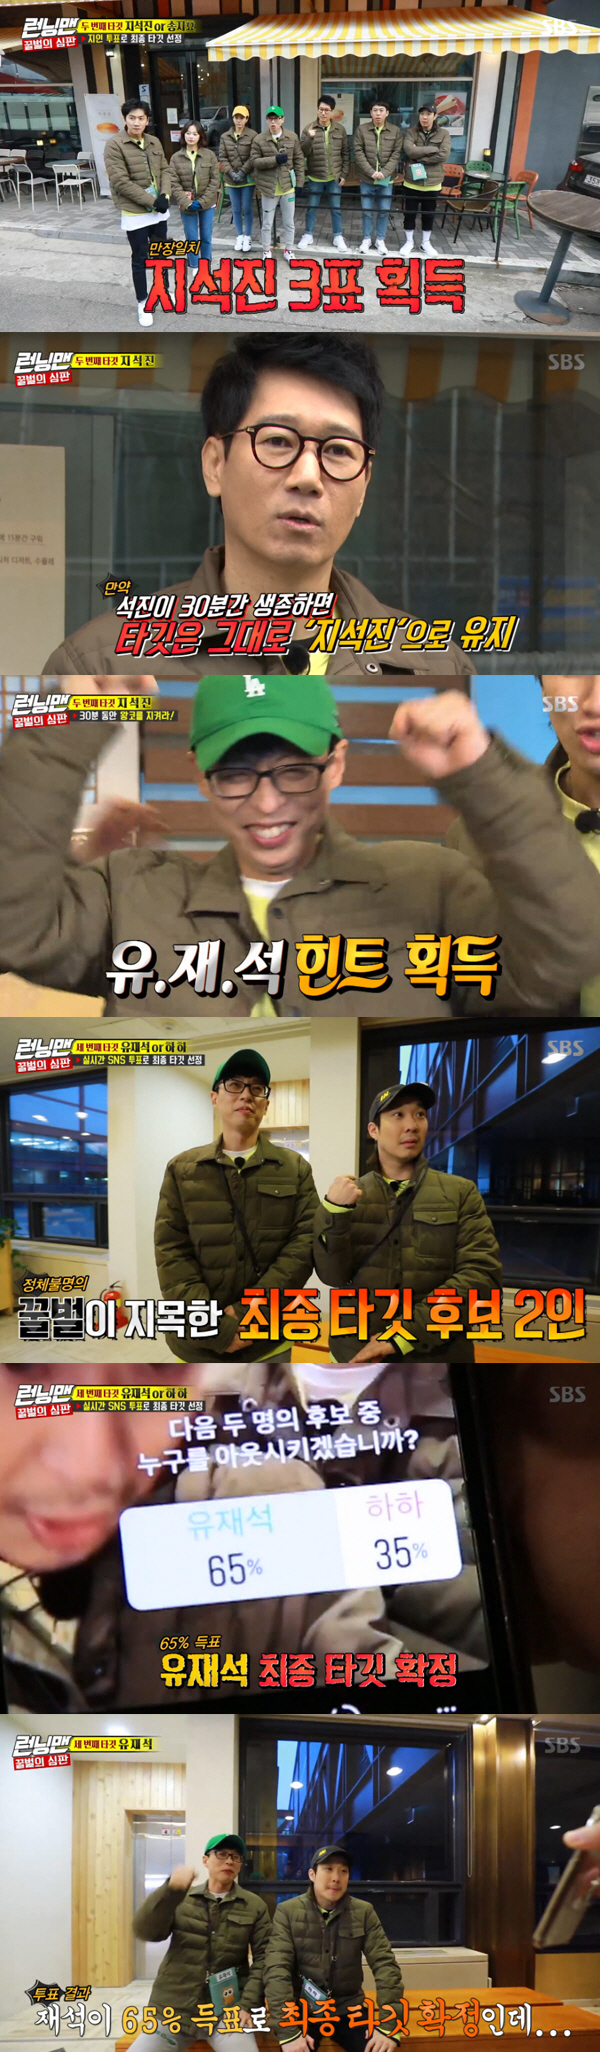 Running Man Lee Kwang-soo and Yang Se-chan and Jeon So-min were the real bees.SBS Running Man, which was broadcast on the 3rd, was a bee counterattack race, and the members breathtaking chase to find the bee was held.On this day, Judge of Questions was a rule to in-N-Out Burger members in turn, causing the members to be afraid.The first target pointed out by the bee was Kim Jong-kook; immediately in-N-Out Burger if the majority is in favor.The members were given the right to vote and proceeded with a group mission, but failed, and won a total of seven ballots; the rest of the members, except Lee Kwang-soo, got the ballot.Kim Jong-kook, who won five votes in favor of the Kim Jong-kook In-N-Out Burger vote, was Baro In-N-Out Burger.The second target for bees was Ji Suk-jin and Song Ji-hyo; the final target was selected by acquaintance vote, and Ji Suk-jin was the second target with three votes out of three.Within half an hour, Ji Suk-jin will be an In-N-Out Burger; the next Darket will be newly designated as soon as Ji Suk-jin is an In-N-Out Burger.However, if Ji Suk-jin survives for 30 minutes, the target remains Ji Suk-jin.The members went on to keep Ji Suk-jin for 30 minutes, and in this process, Yoo Jae-Suk got a hint about bee.The hints obtained by Yoo Jae-Suk were Young; Yoo Jae-Suk, who saw the hints, was embarrassed.In particular, Kim Jong-kook, who disguised himself as a honeybee with only two minutes left in the new target designation, opened the name tag of Ji Suk-jin.The third target was Yoo Jae-Suk and Haha; the final target was selected by real-time SNS votes among the two, and the final target was Yoo Jae-Suk.The members, except Yoo Jae-Suk, who was targeted by the bees, started a full-scale race; the members sought out Yoo Jae-Suk, who had previously obtained hints.At this time Lee Kwang-soo found a bee, rip off the name tags of Song Ji-hyo, Yang Se-chan and bee; he was none other than Yoo Jae-Suk.But Yoo Jae-Suk was a fake bee.At that moment, Yoo Jae-Suk pointed to Yang Se-chan, Song Ji-hyo and Haha, and Lee Kwang-soo ripped off the name tag of Baro Yang Se-chan.The identity of Yang Se-chan was a real bee.The members also found Ji Suk-jin and Kim Jong-kook who were eliminated earlier in the race, and got hints from them that said the youngest and 3435.Kim Jong-kook, Haha and Song Ji-hyo found out that Running Man youngest line Lee Kwang-soo, Jeon So-min and Yang Se-chan were bees after the meeting.Later, the breathtaking race of members and bees began; after a fierce race, Lee Kwang-soo succeeded in keeping the name tag.Moments later Lee Kwang-soo, Yang Se-chan and Jeon So-min all pointed to Yoo Jae-Suk, and were given a plight penalty.